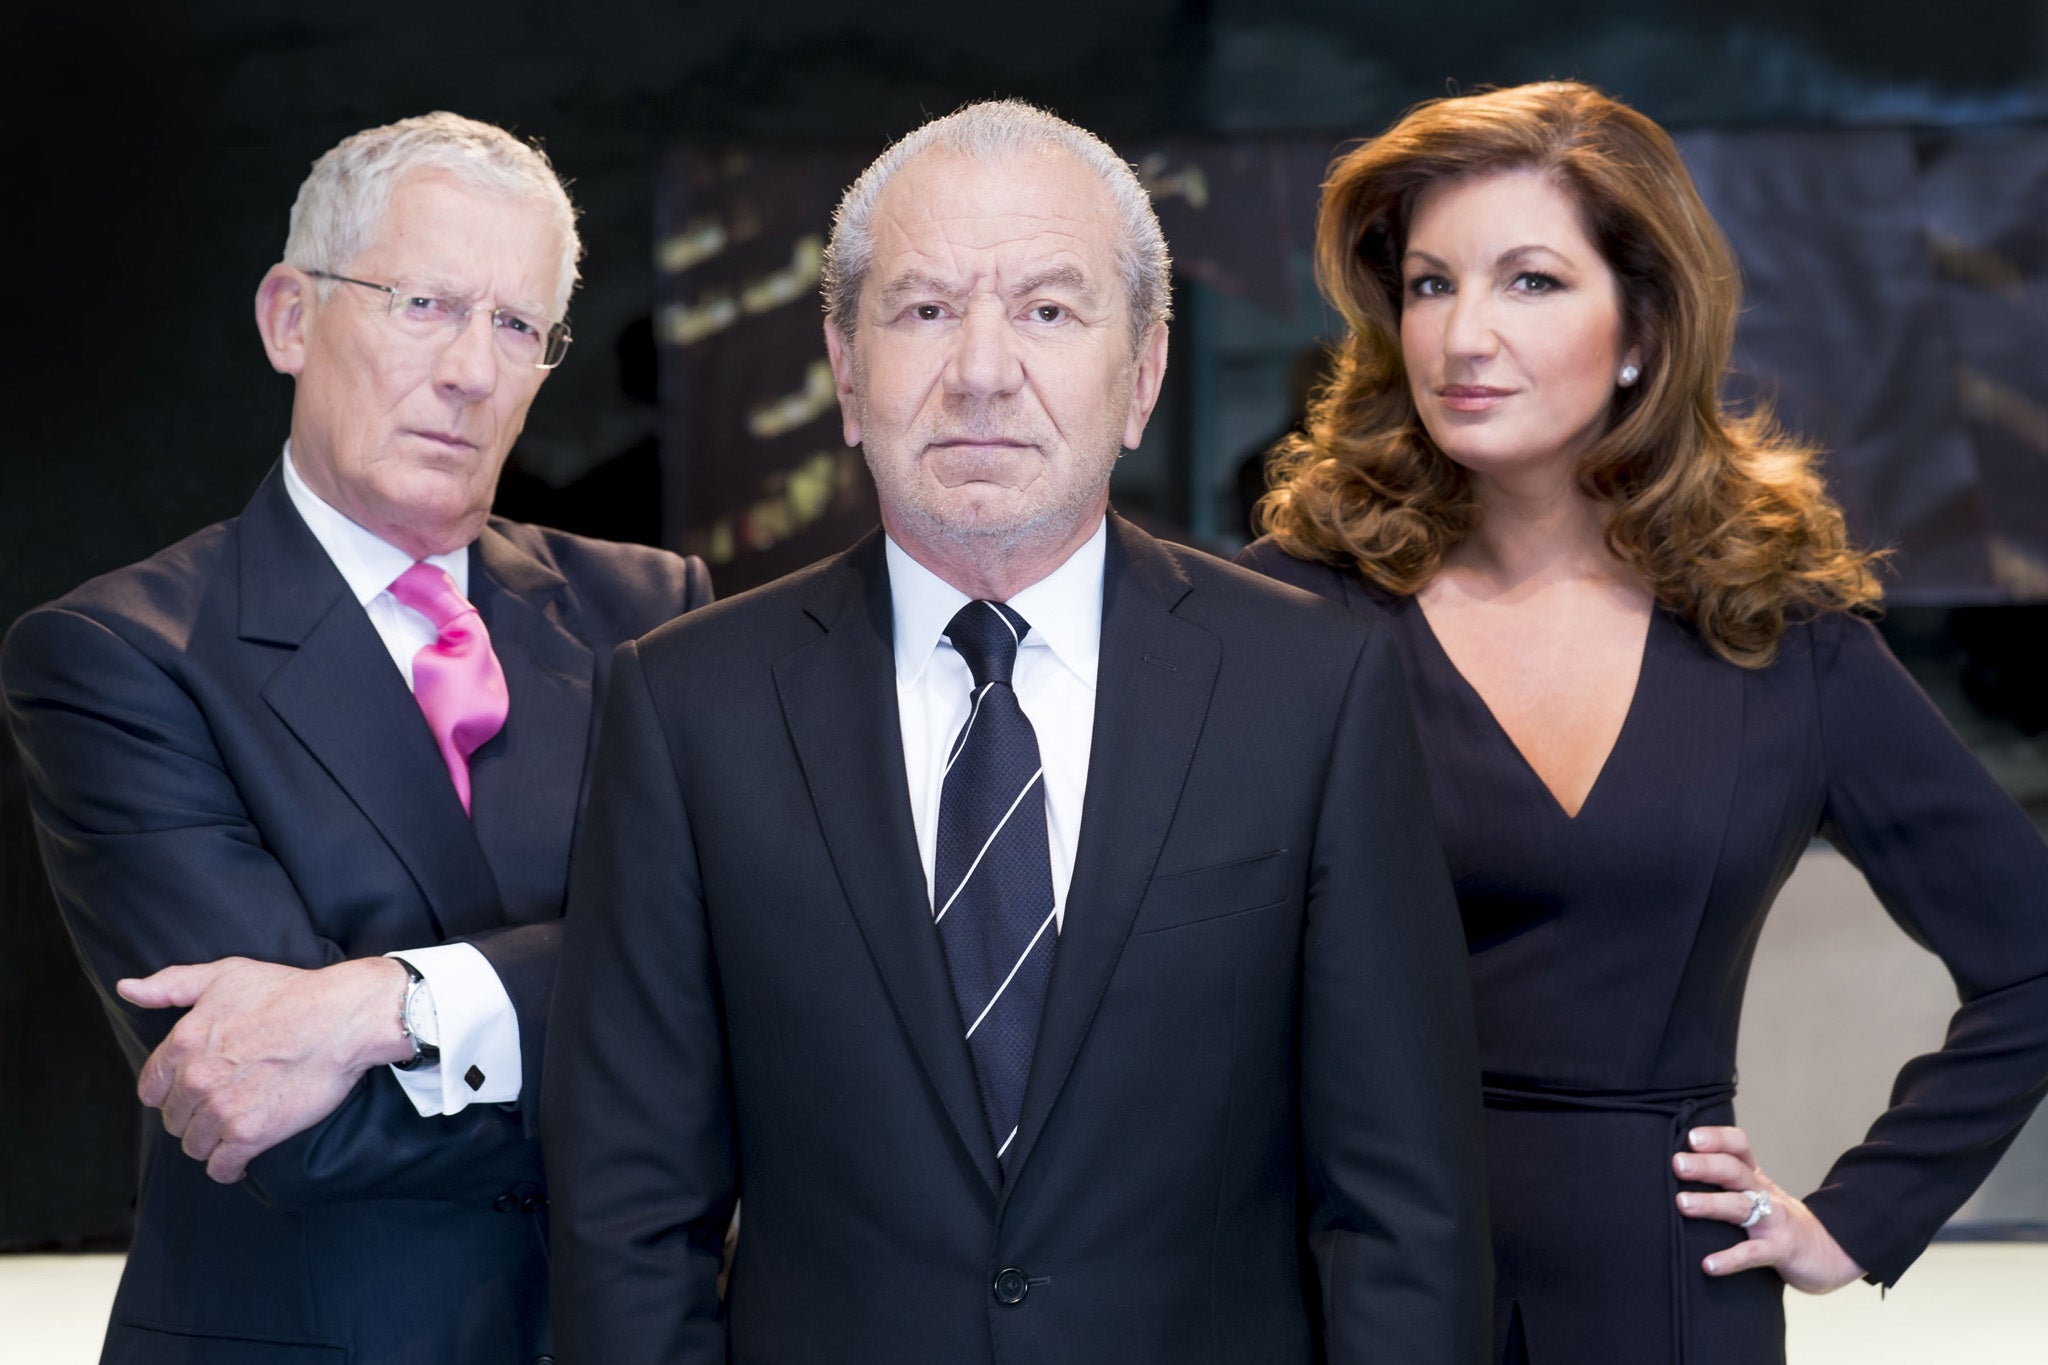 Nick Hewer, Lord Alan Sugar, Karren Brady from this year's BBC programme, The Apprentice. 